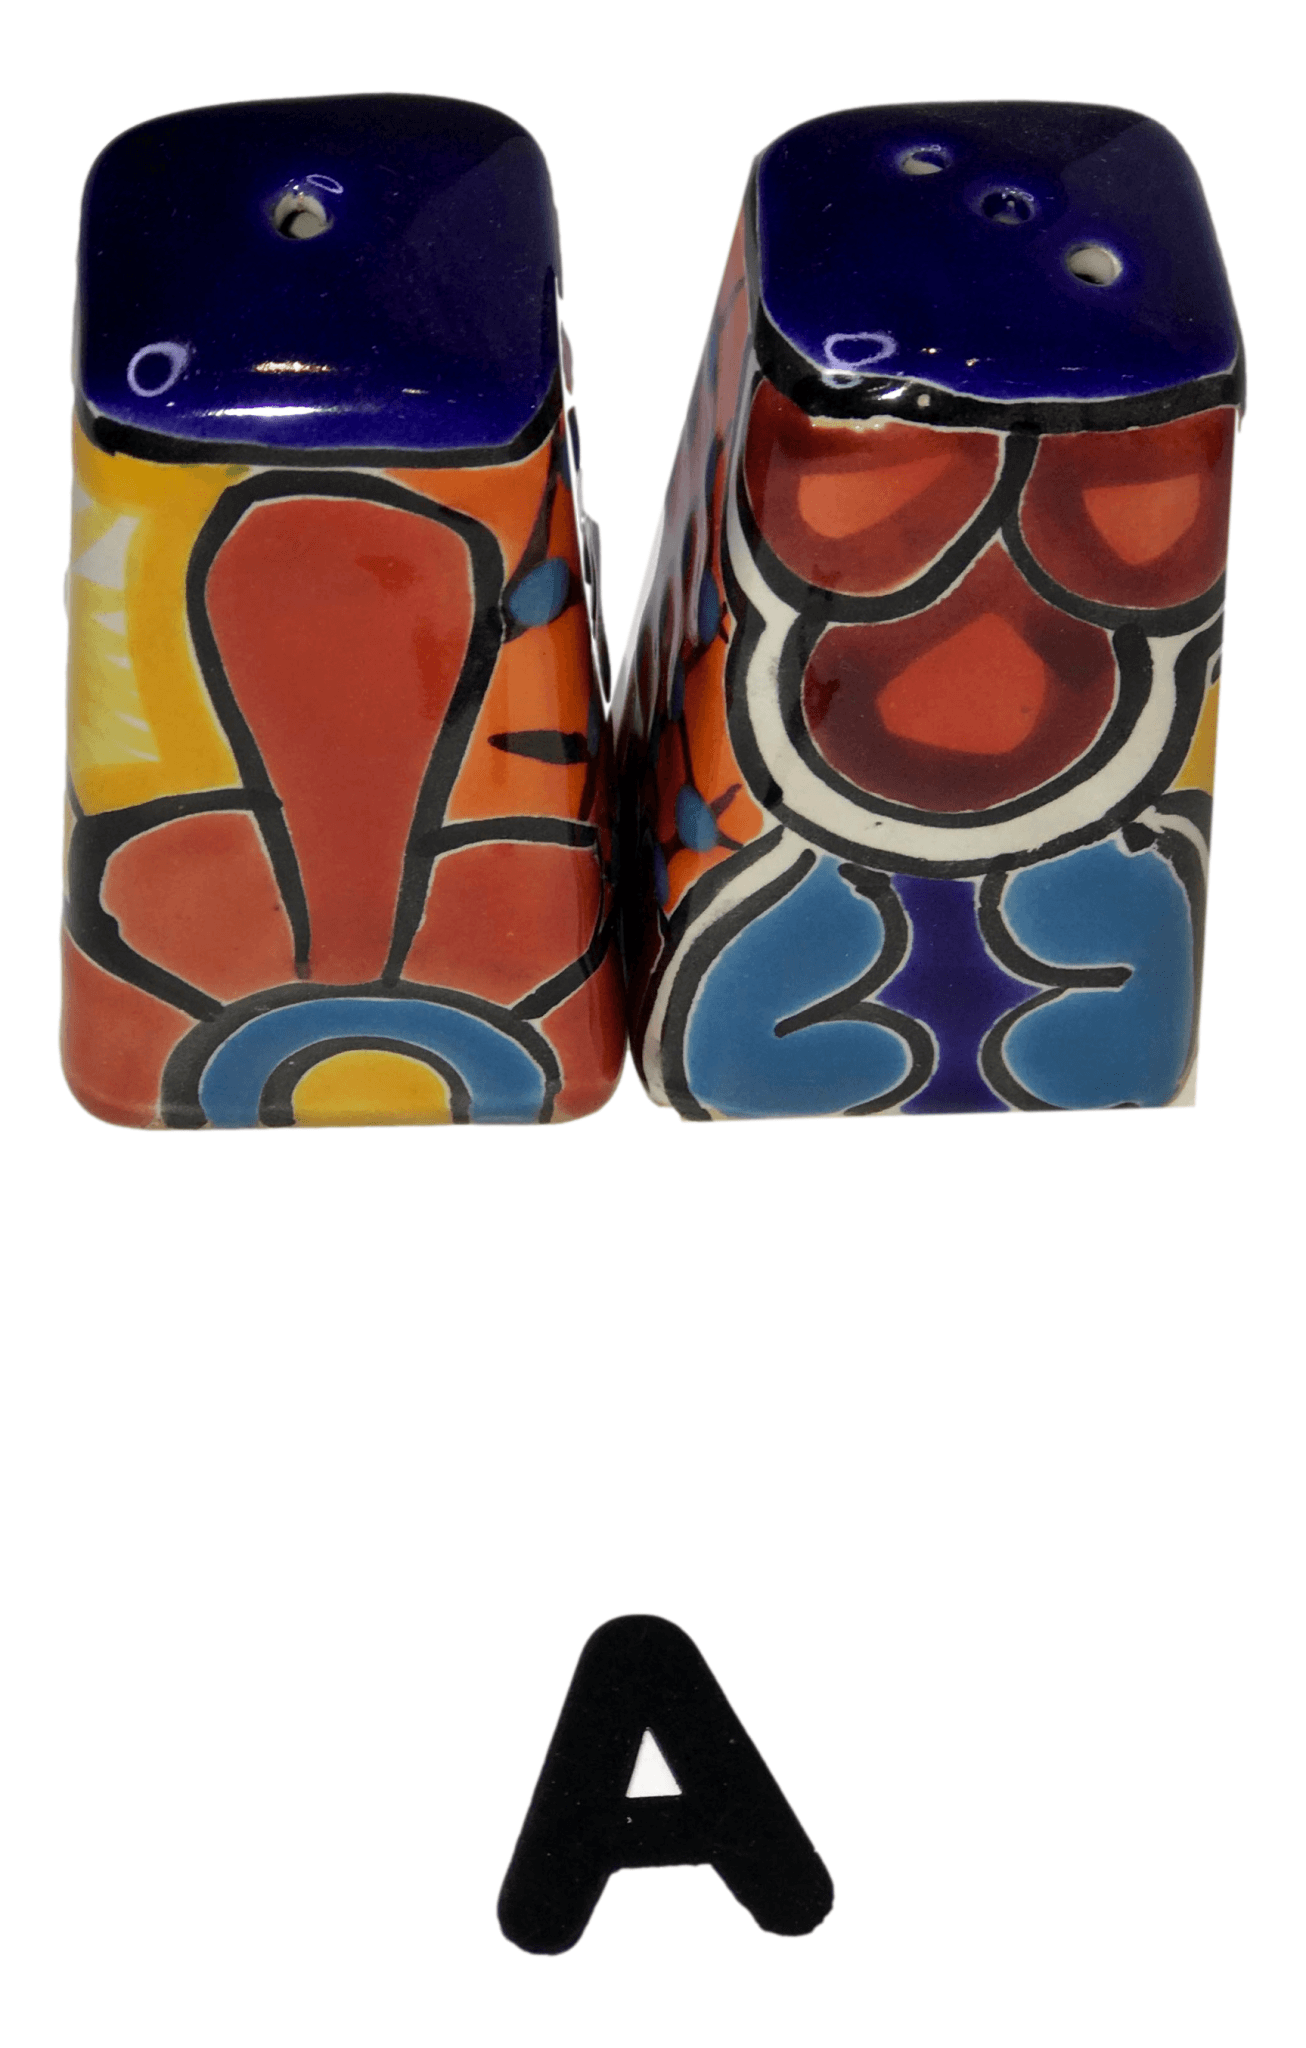 Talavera Dishware Square Salt and Pepper Shaker Set of 2 Handcrafted By Silled Mexican Artisans H:4 inches - Ysleta Mission Gift Shop- VOTED 2022 El Paso's Best Gift Shop